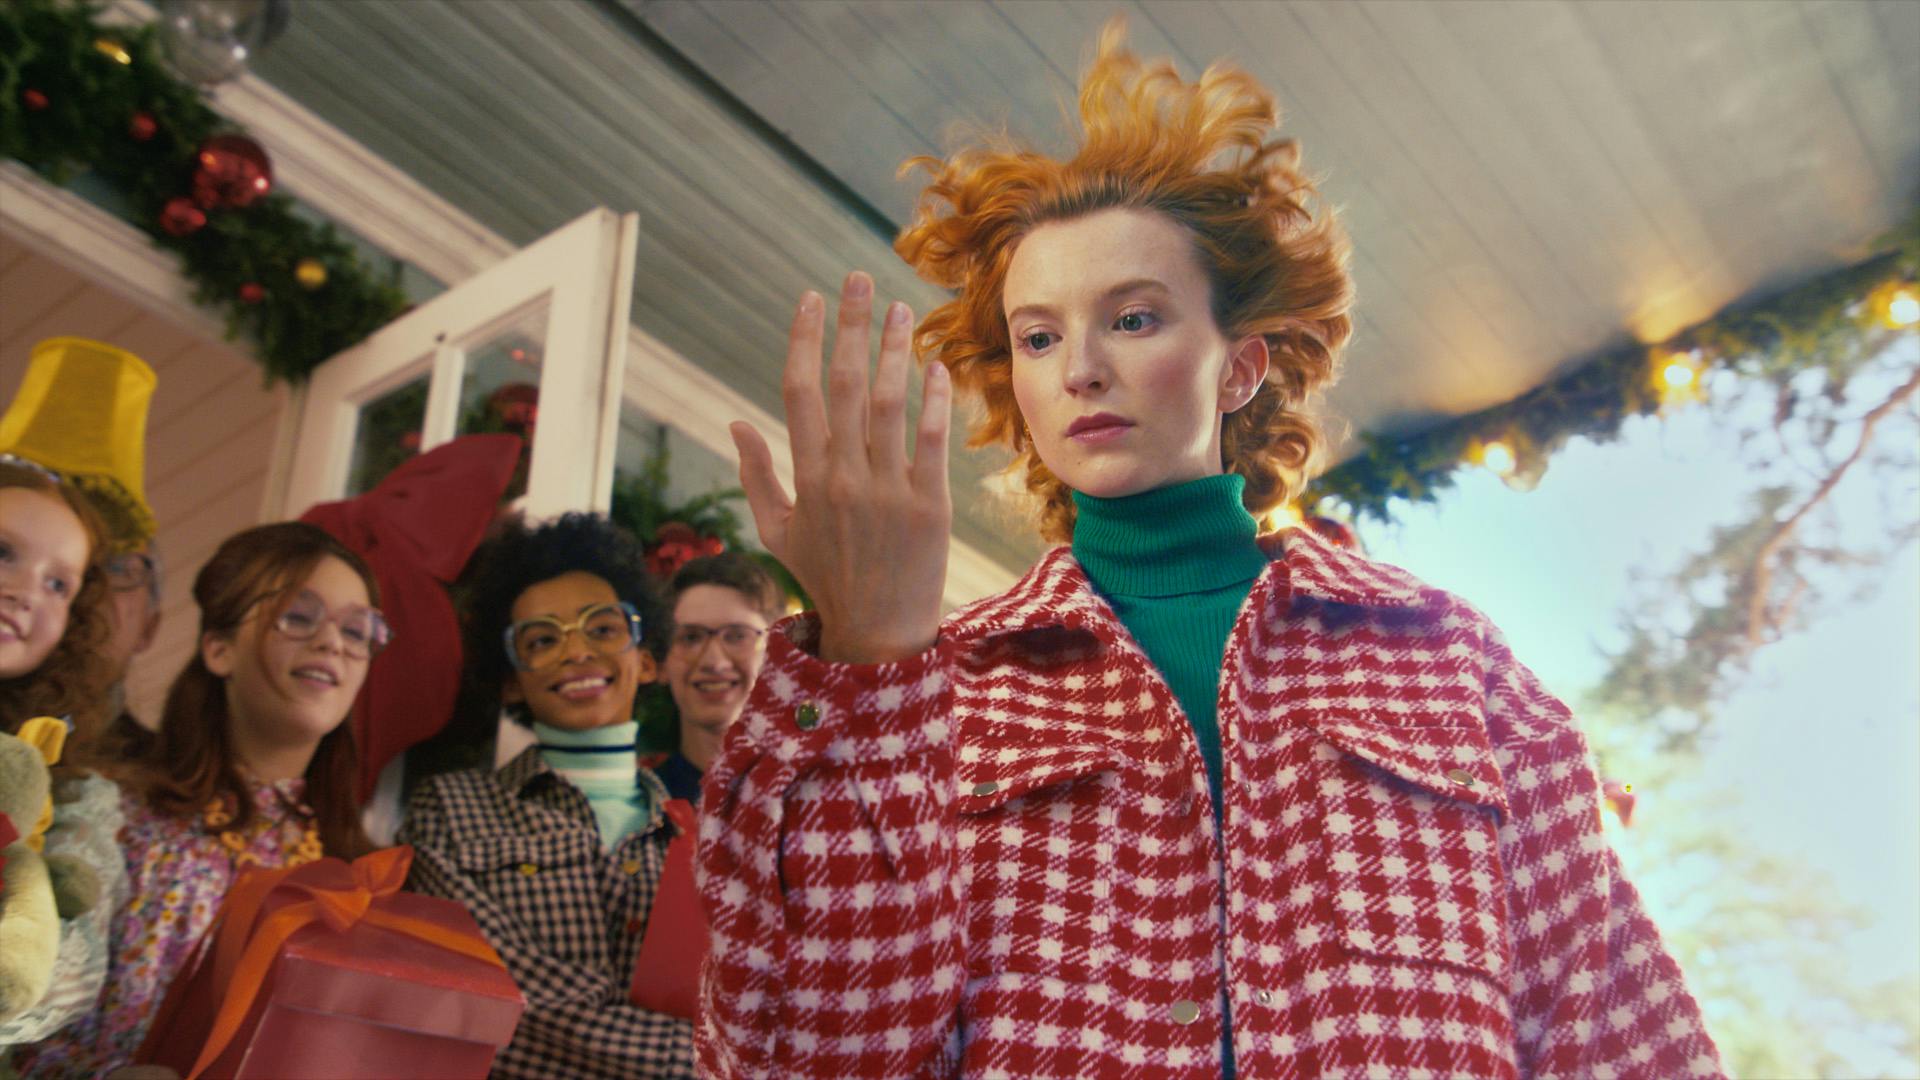 TK Maxx kicks off Christmas with quirky ad